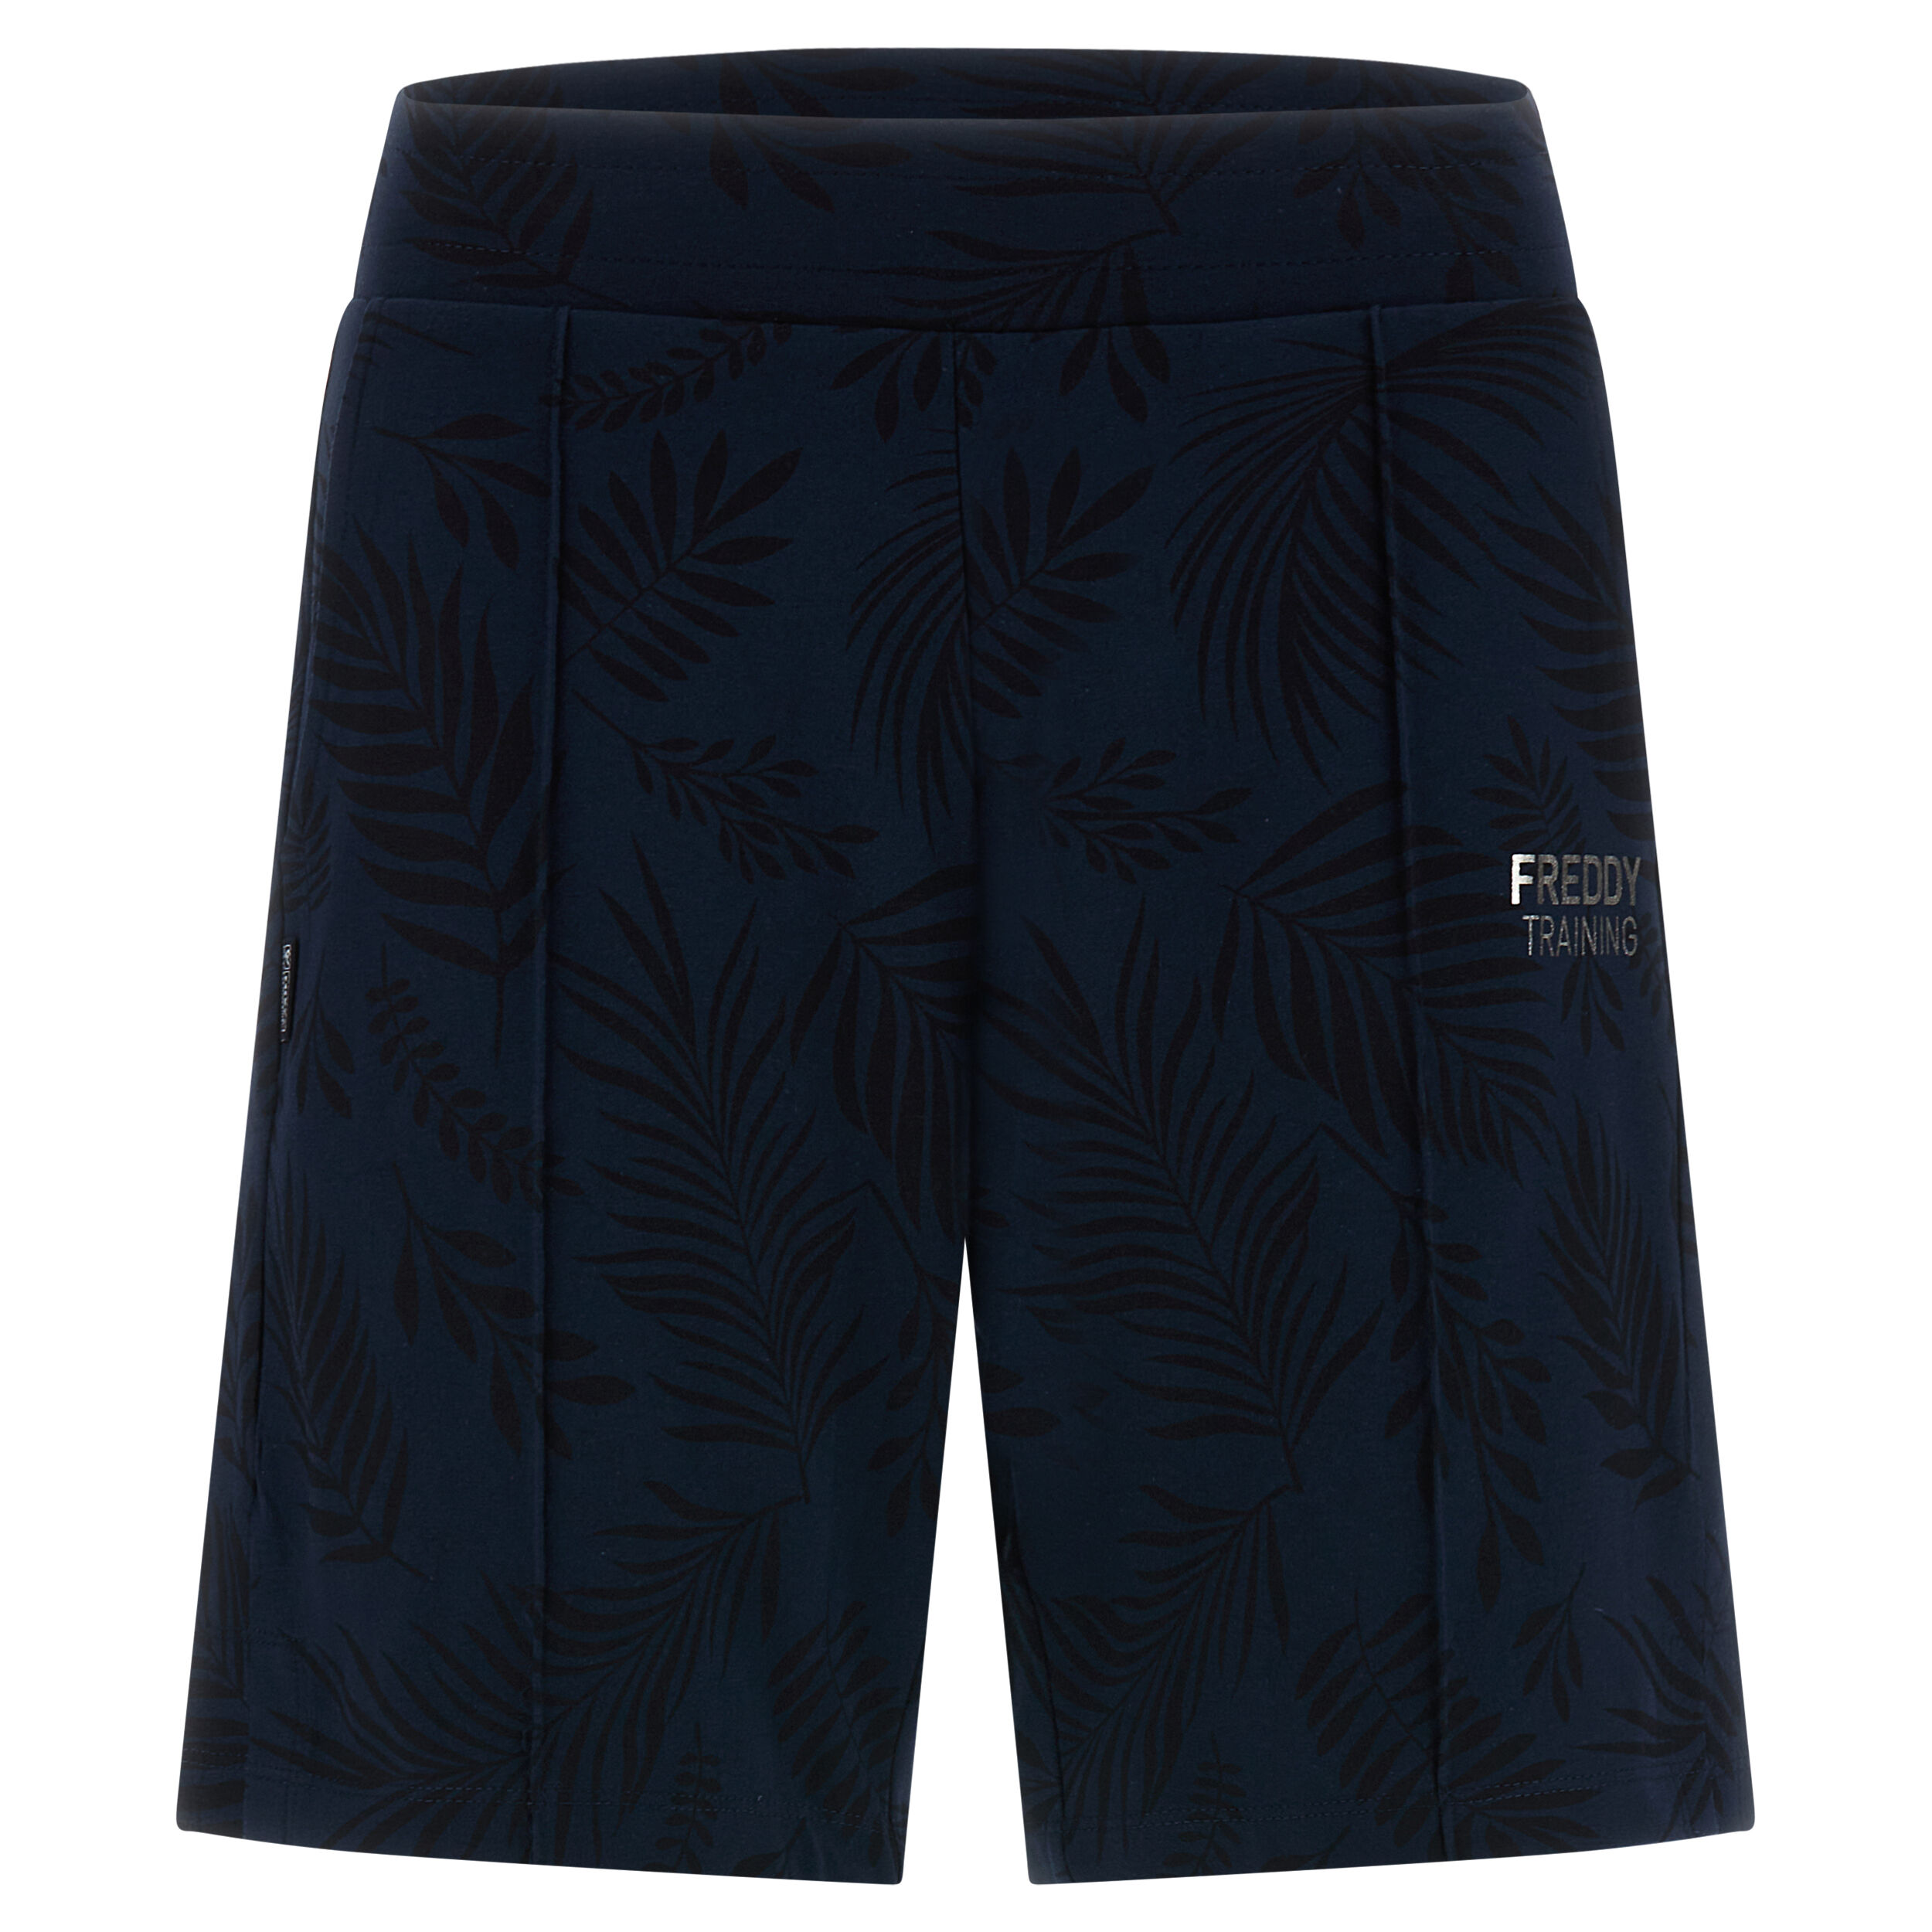 Freddy Pantaloncini in jersey stampa foliage tropicale all over Allover Leaves Blue Donna Extra Small